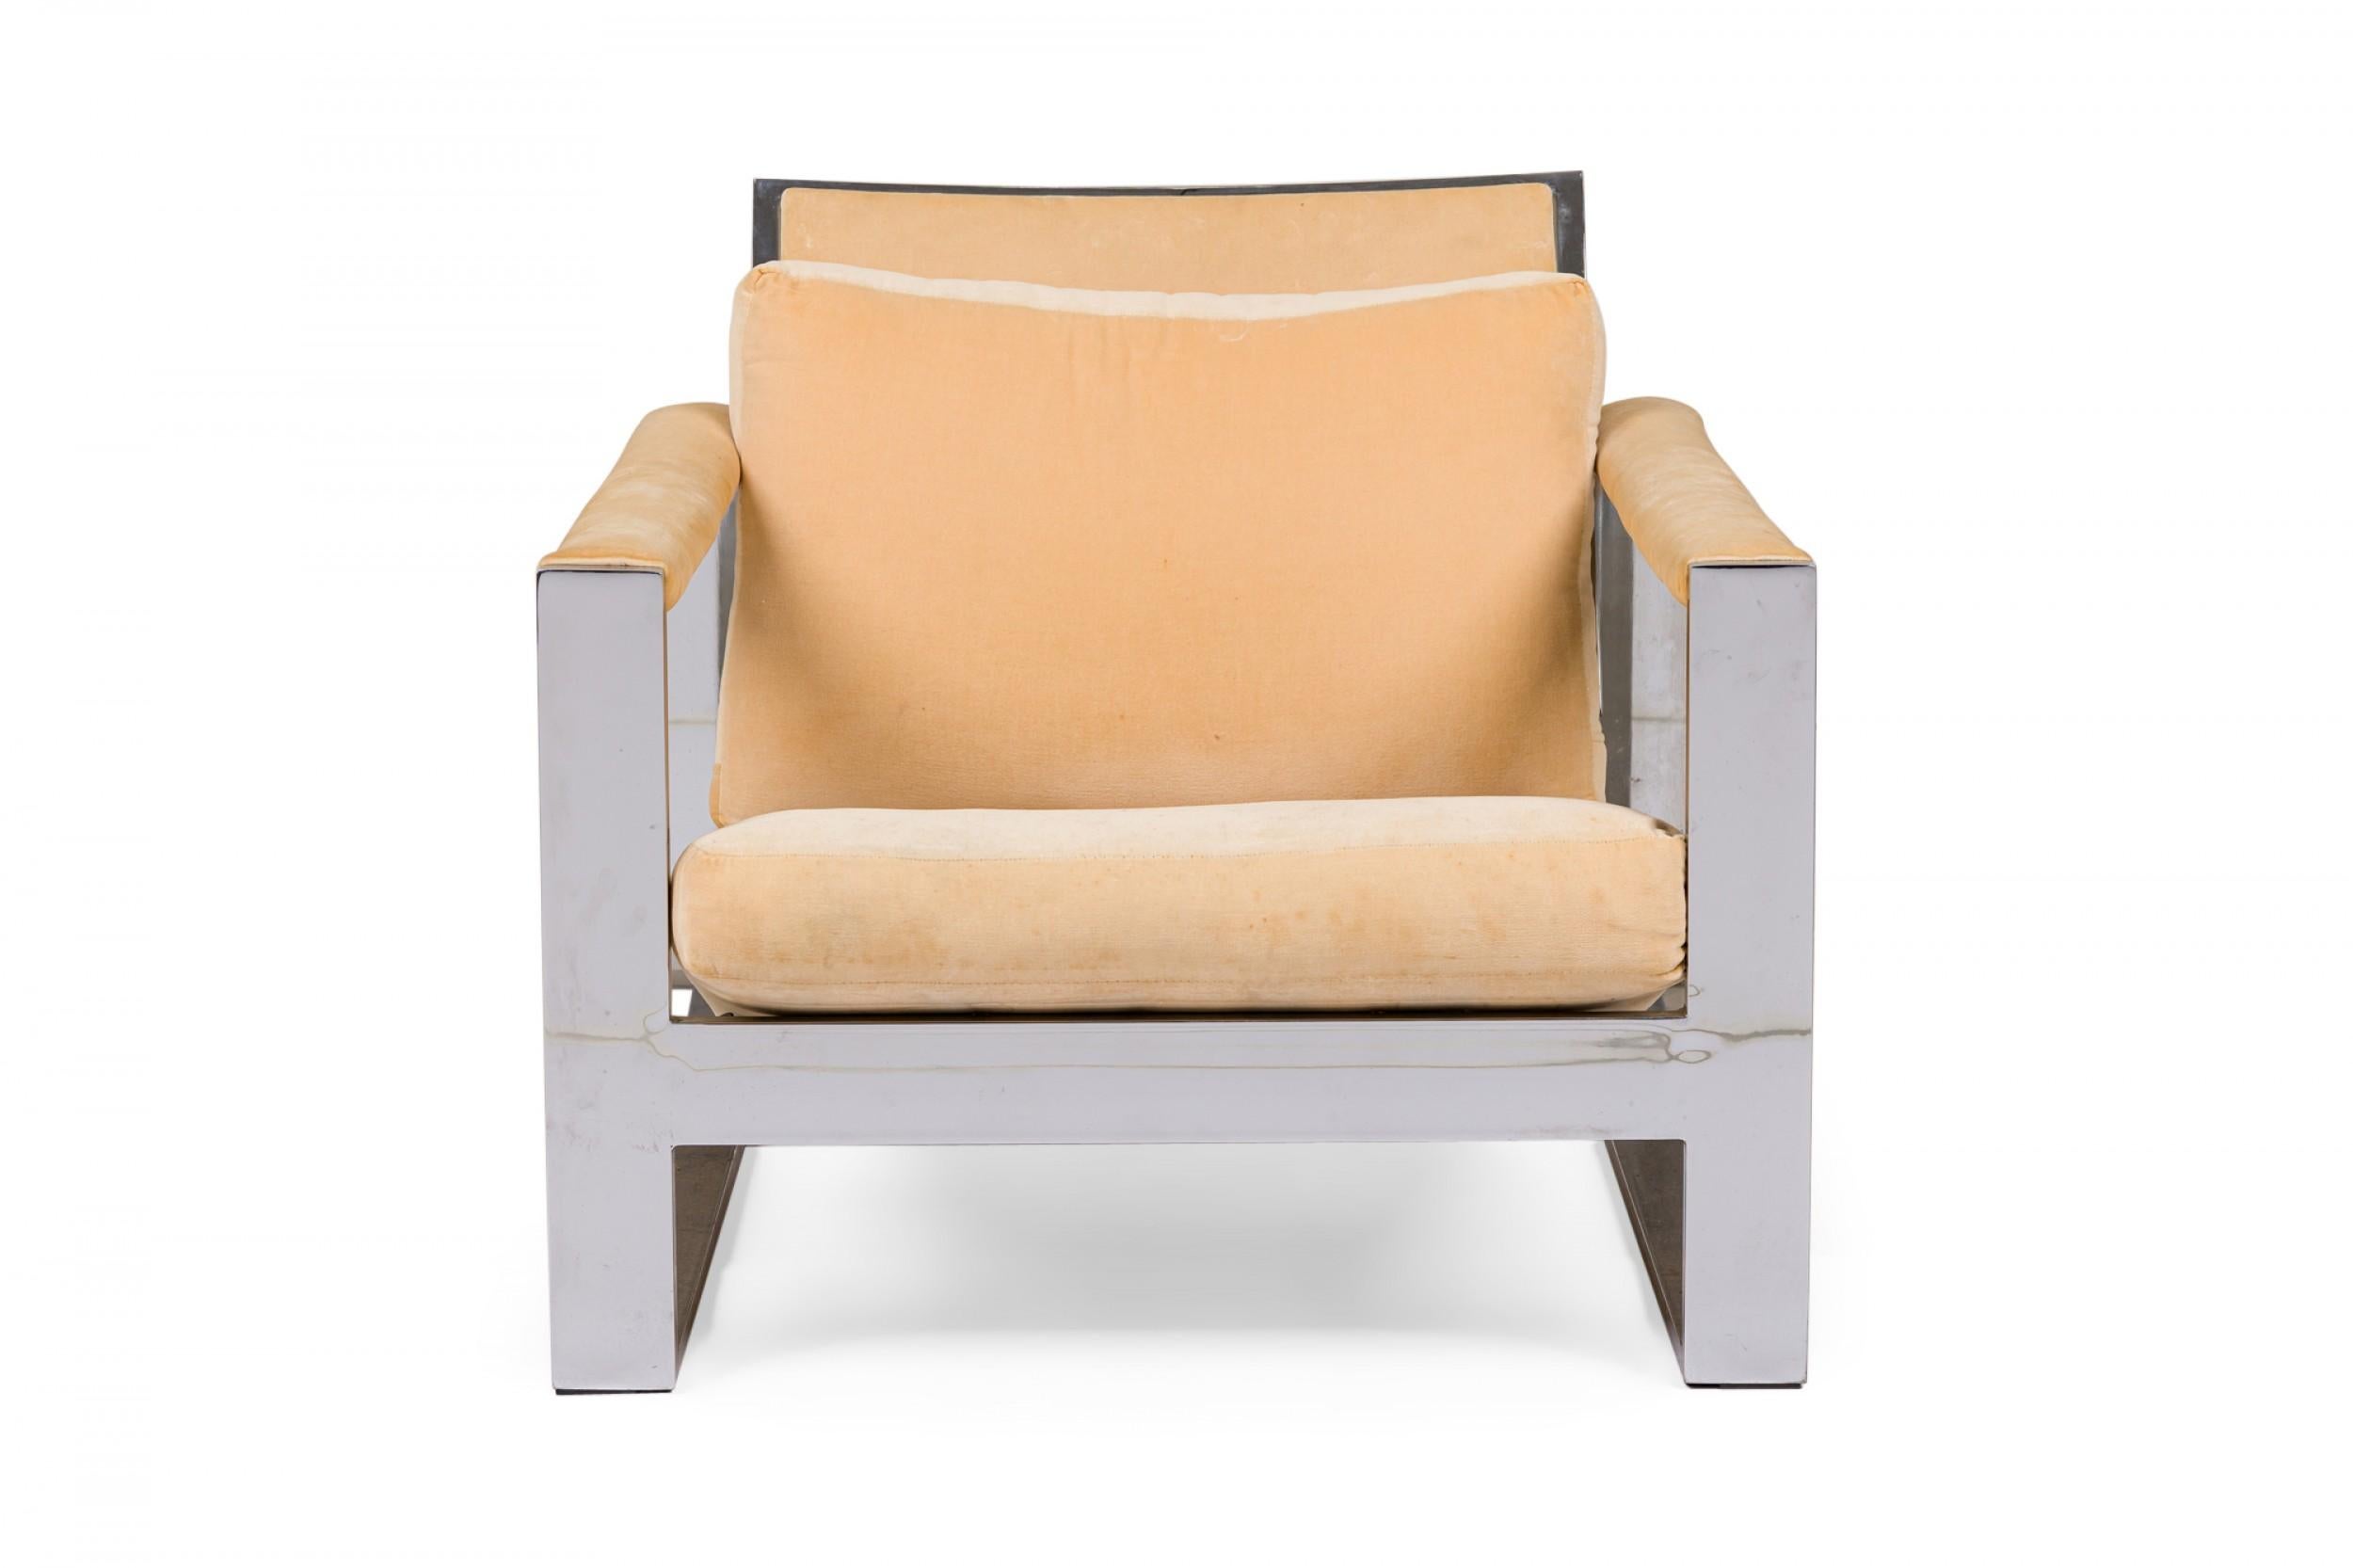 American Mid-Century 'Tank' form lounge / armchair with a flat bar polished chrome frame and peach colored fabric upholstered seat, back and arm covers. (MILO BAUGHMAN).
 